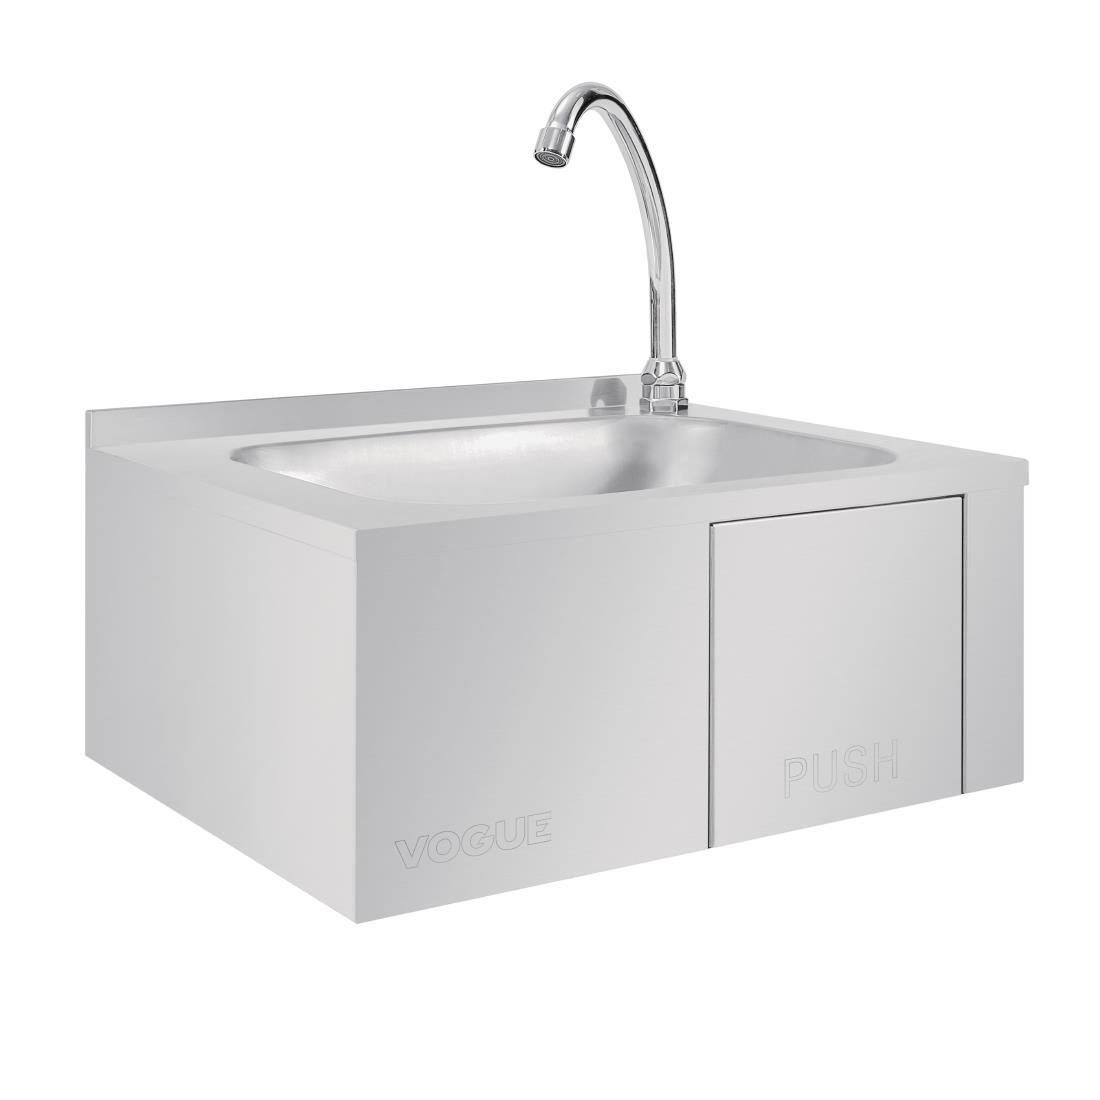 Vogue Stainless Steel Knee Operated Sink - GL280  - 4